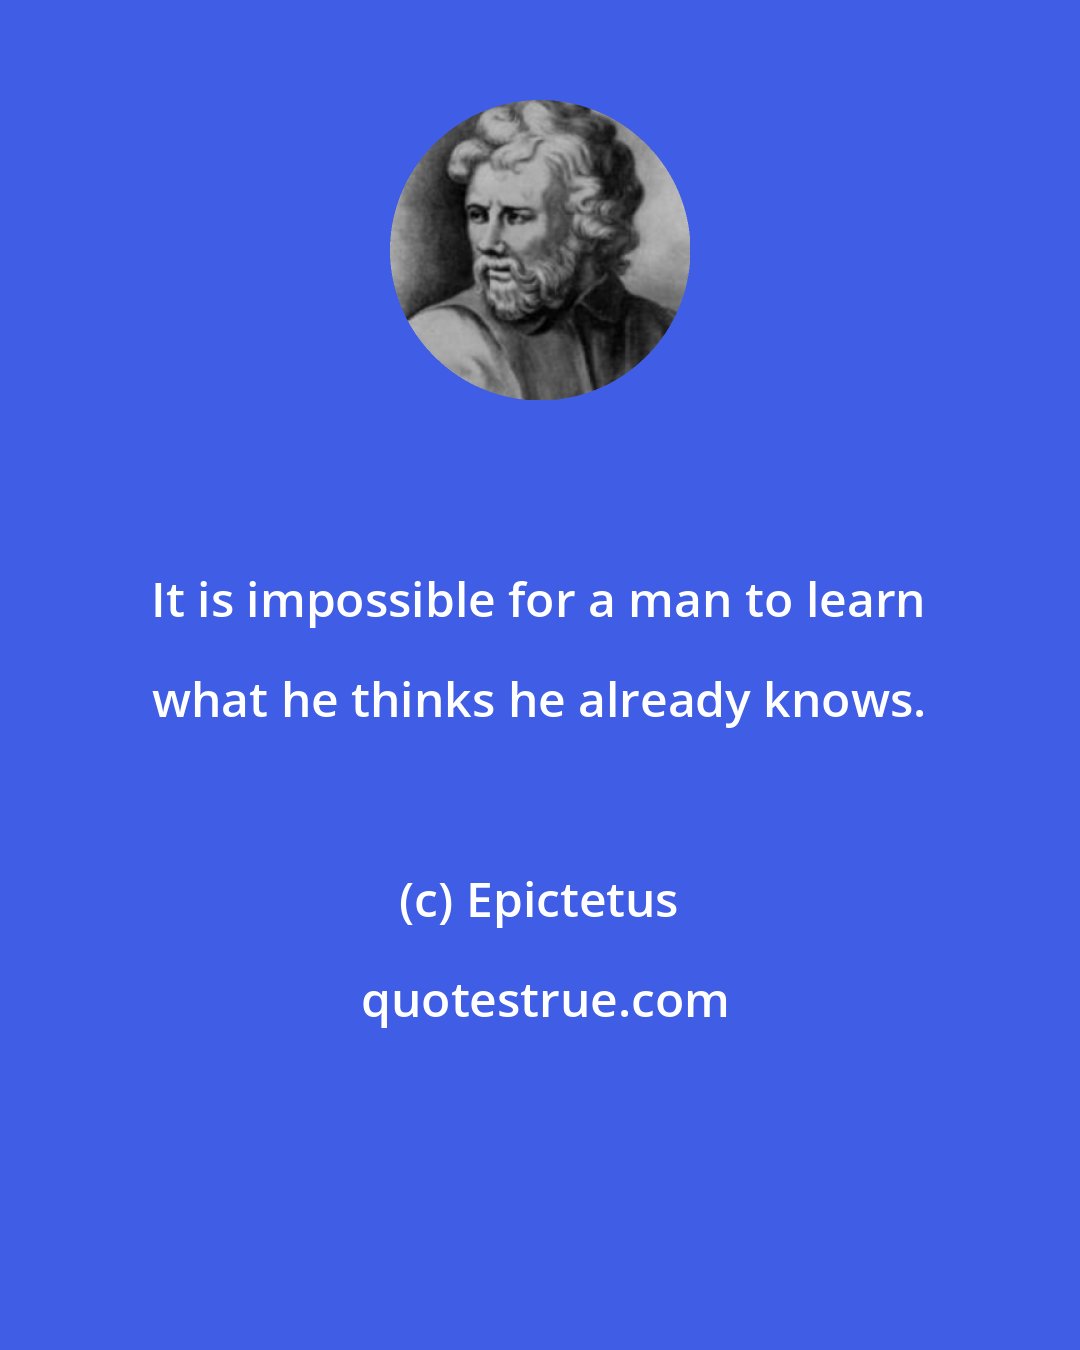 Epictetus: It is impossible for a man to learn what he thinks he already knows.